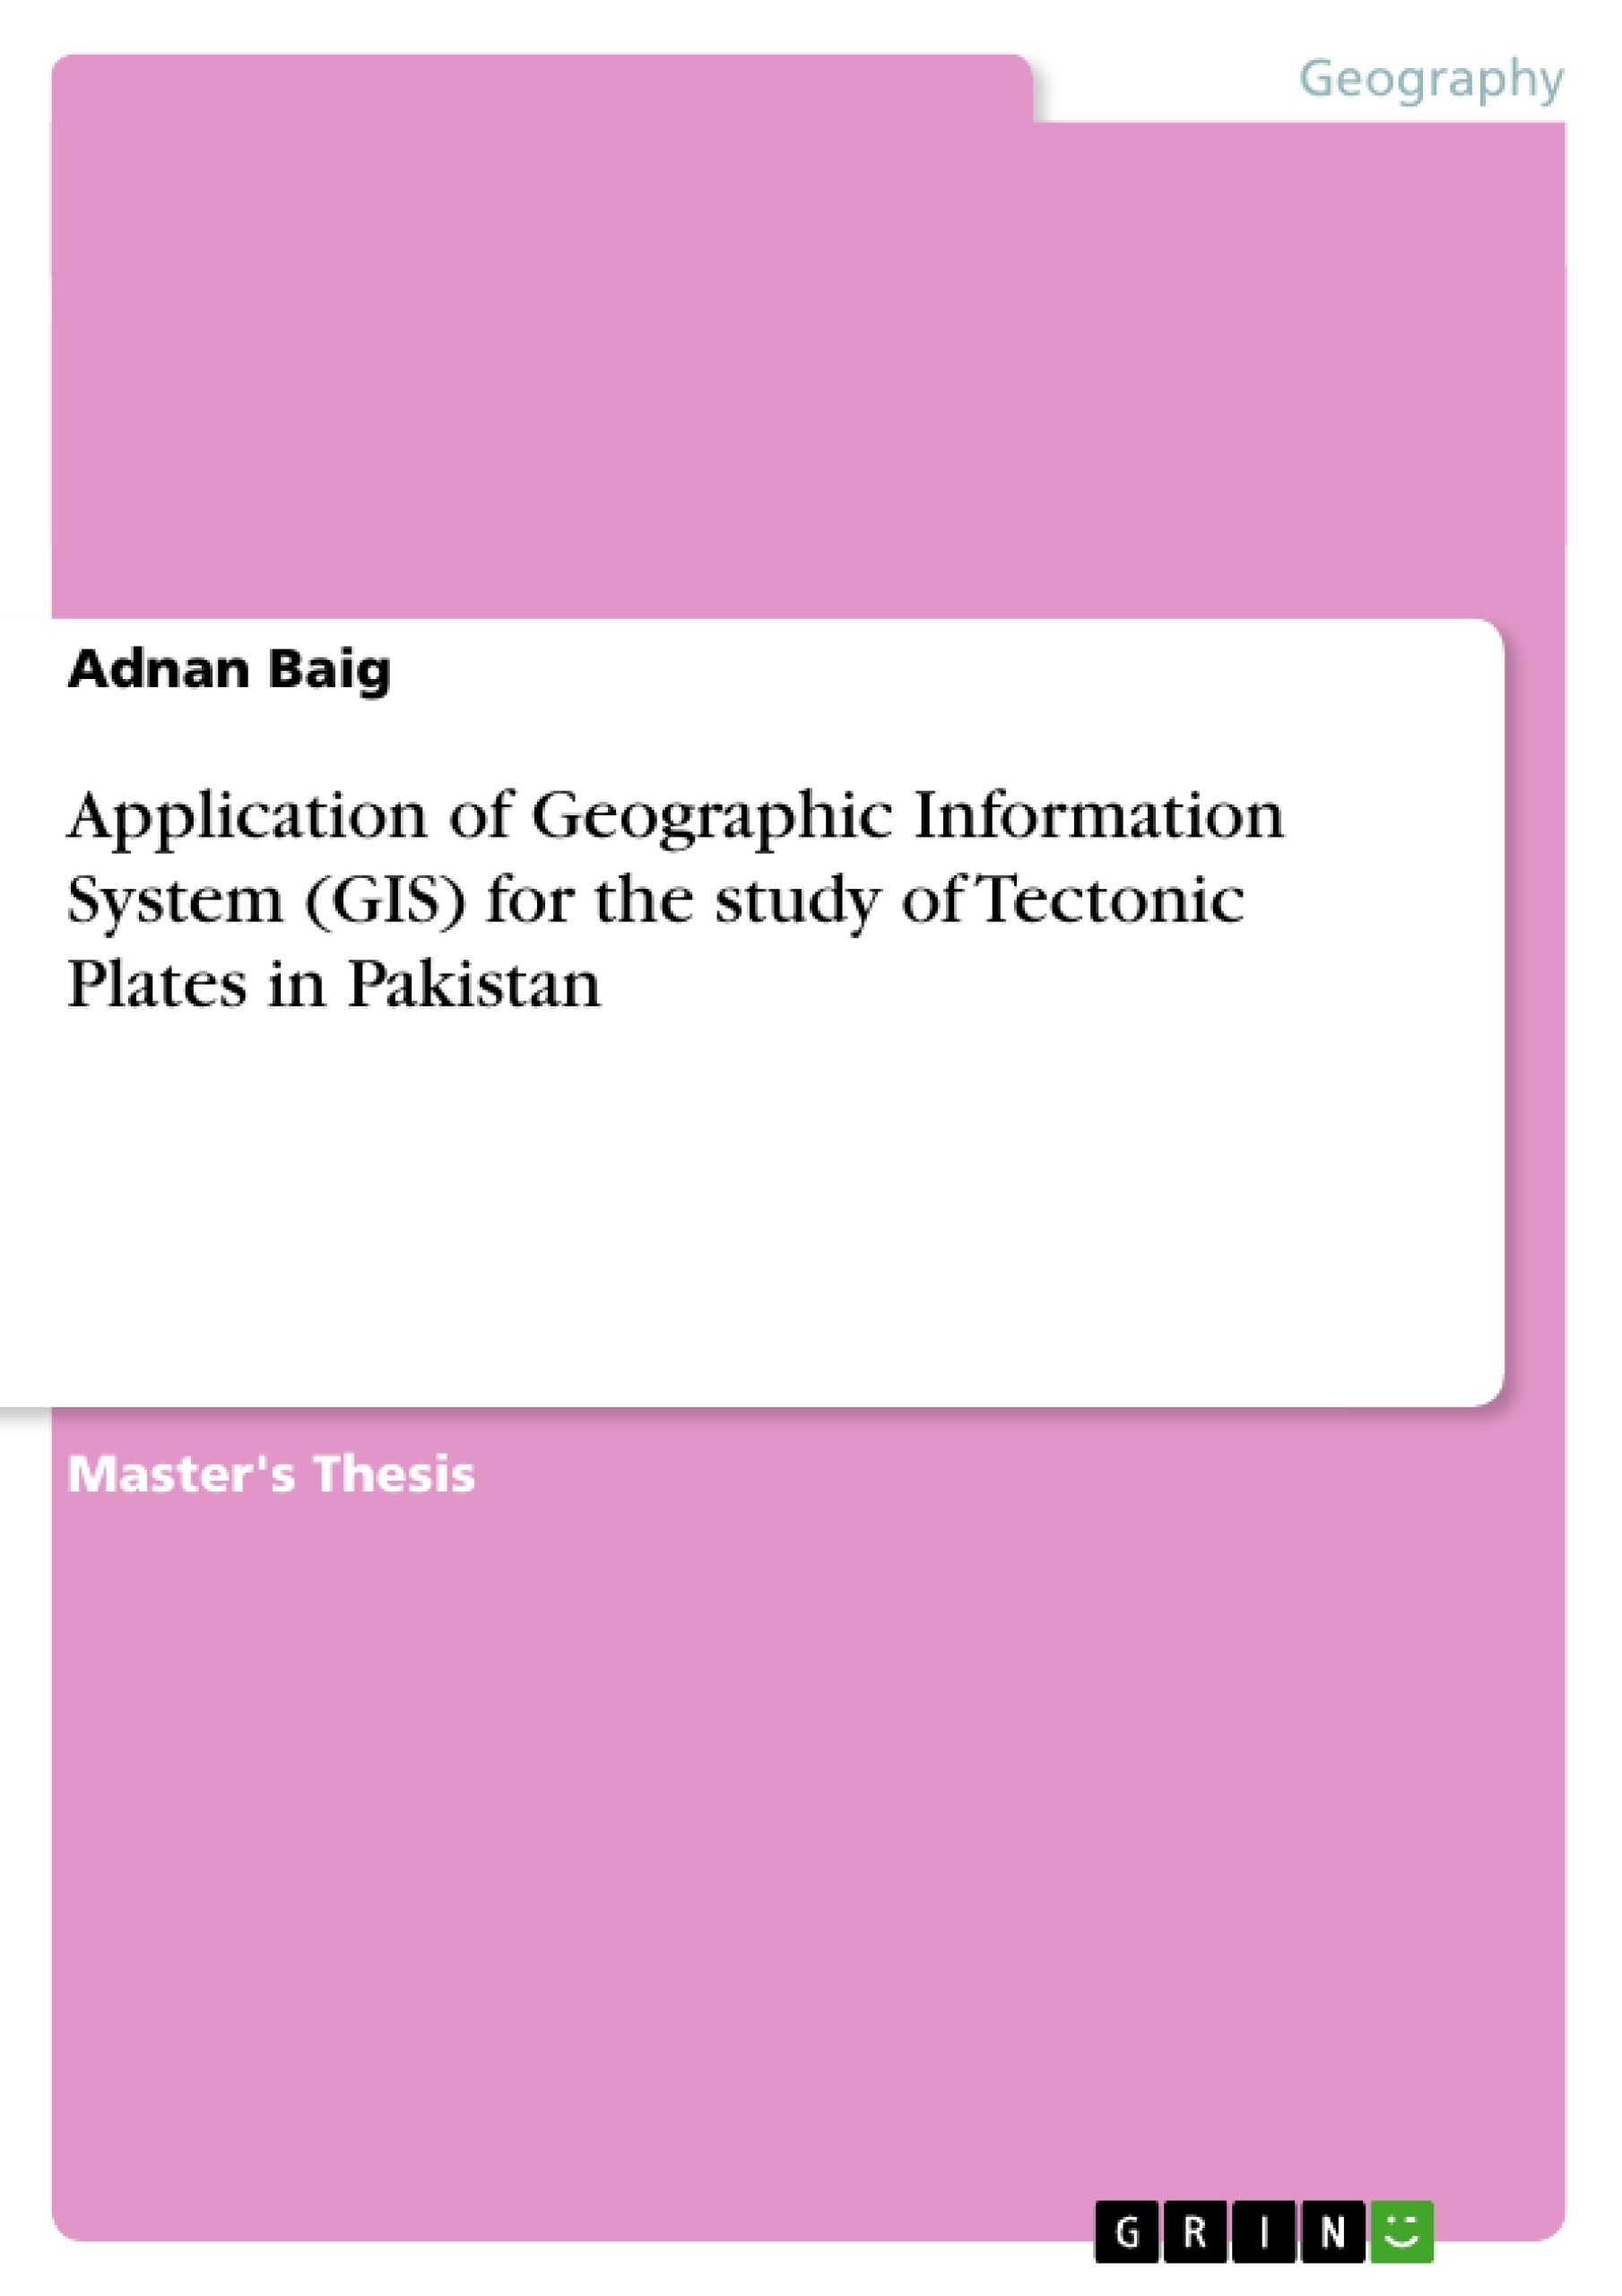 Title: Application of Geographic Information System (GIS) for the study of Tectonic Plates in Pakistan